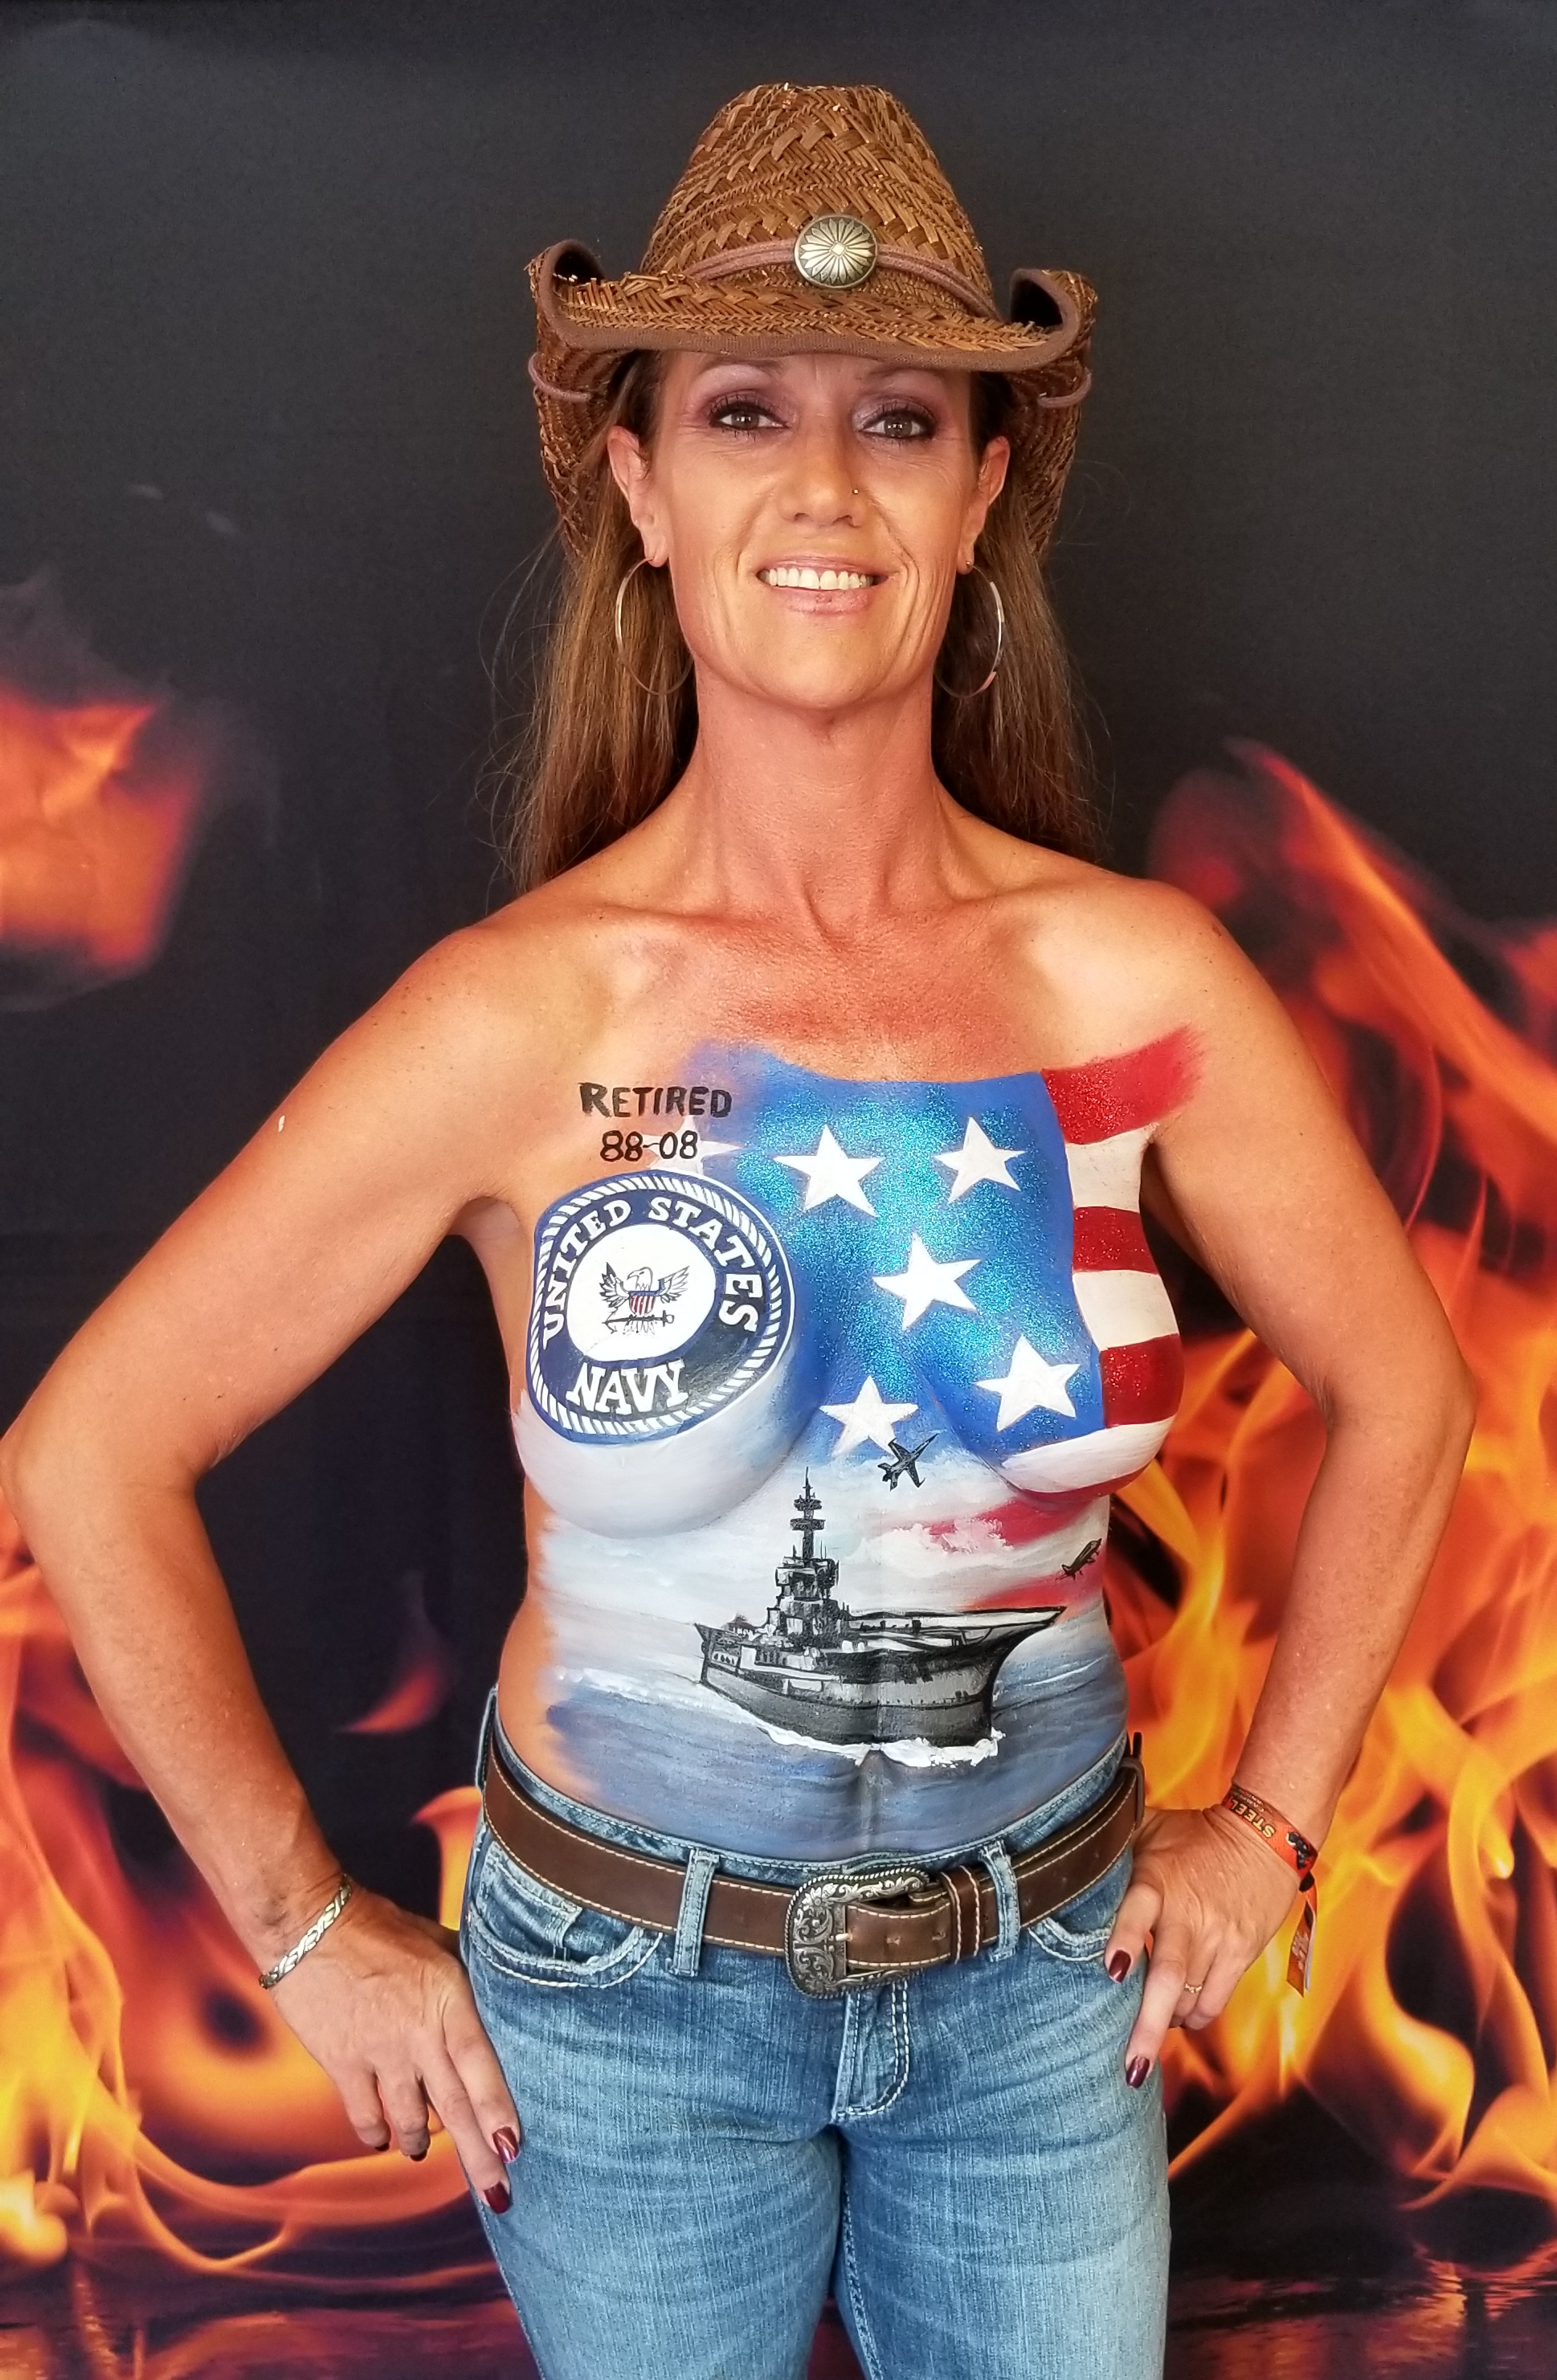 long haired brunette with a painting on her top half saluting the navy including naval ship painted on her abdomen and a flag above